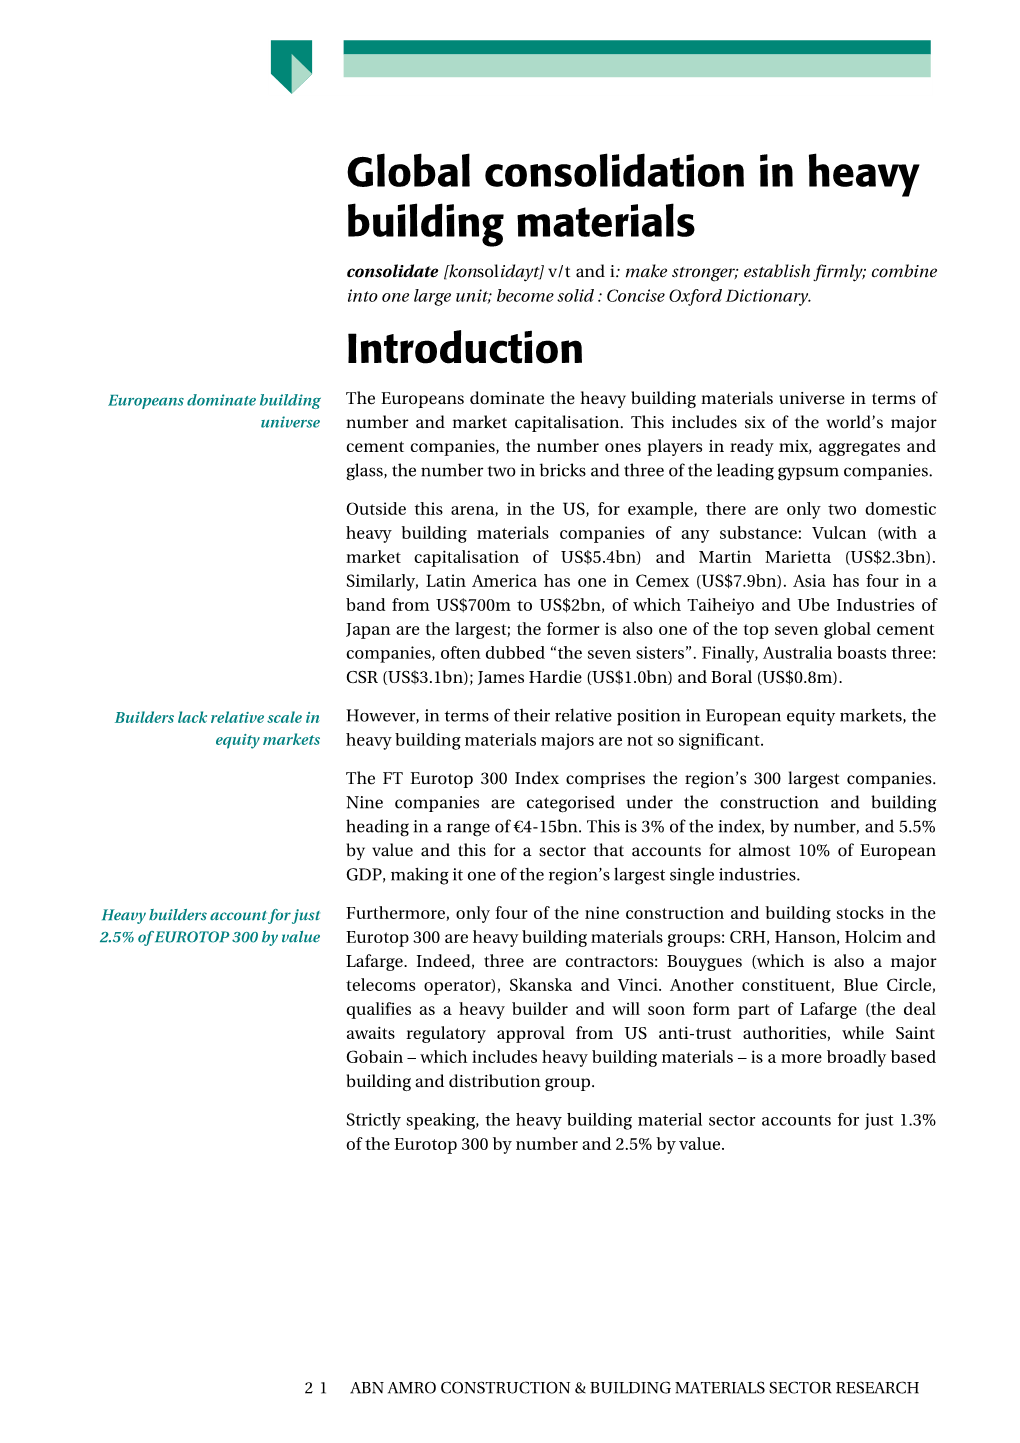 Global Consolidation in Heavy Building Materials Introduction